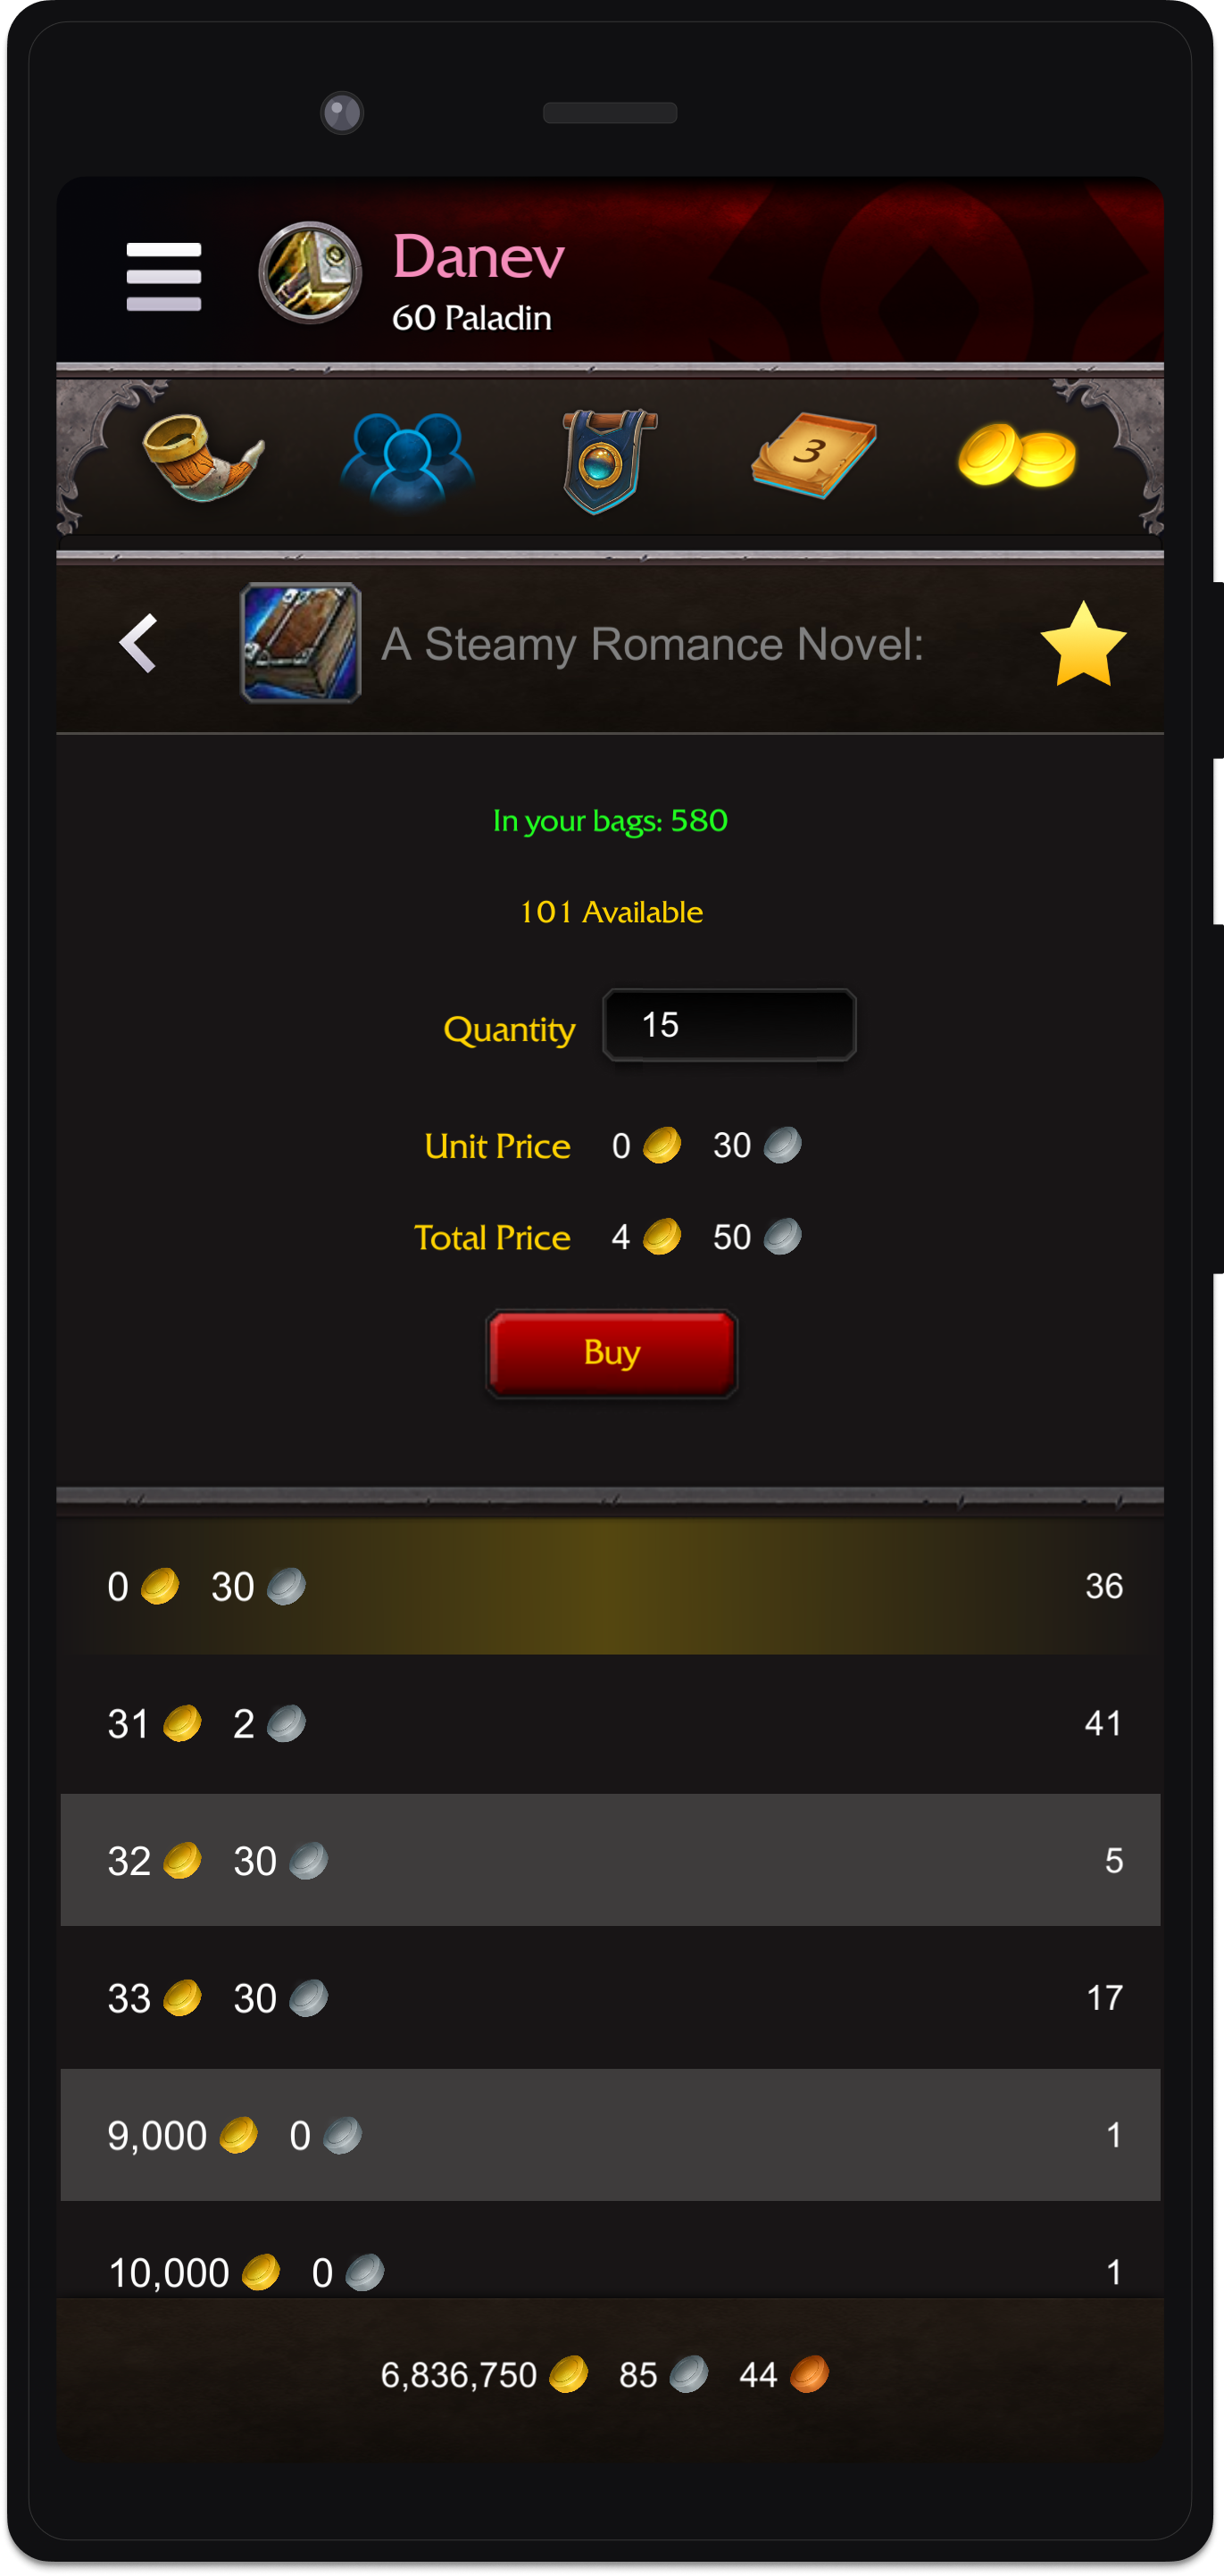 Auction house interface for buying commodities.